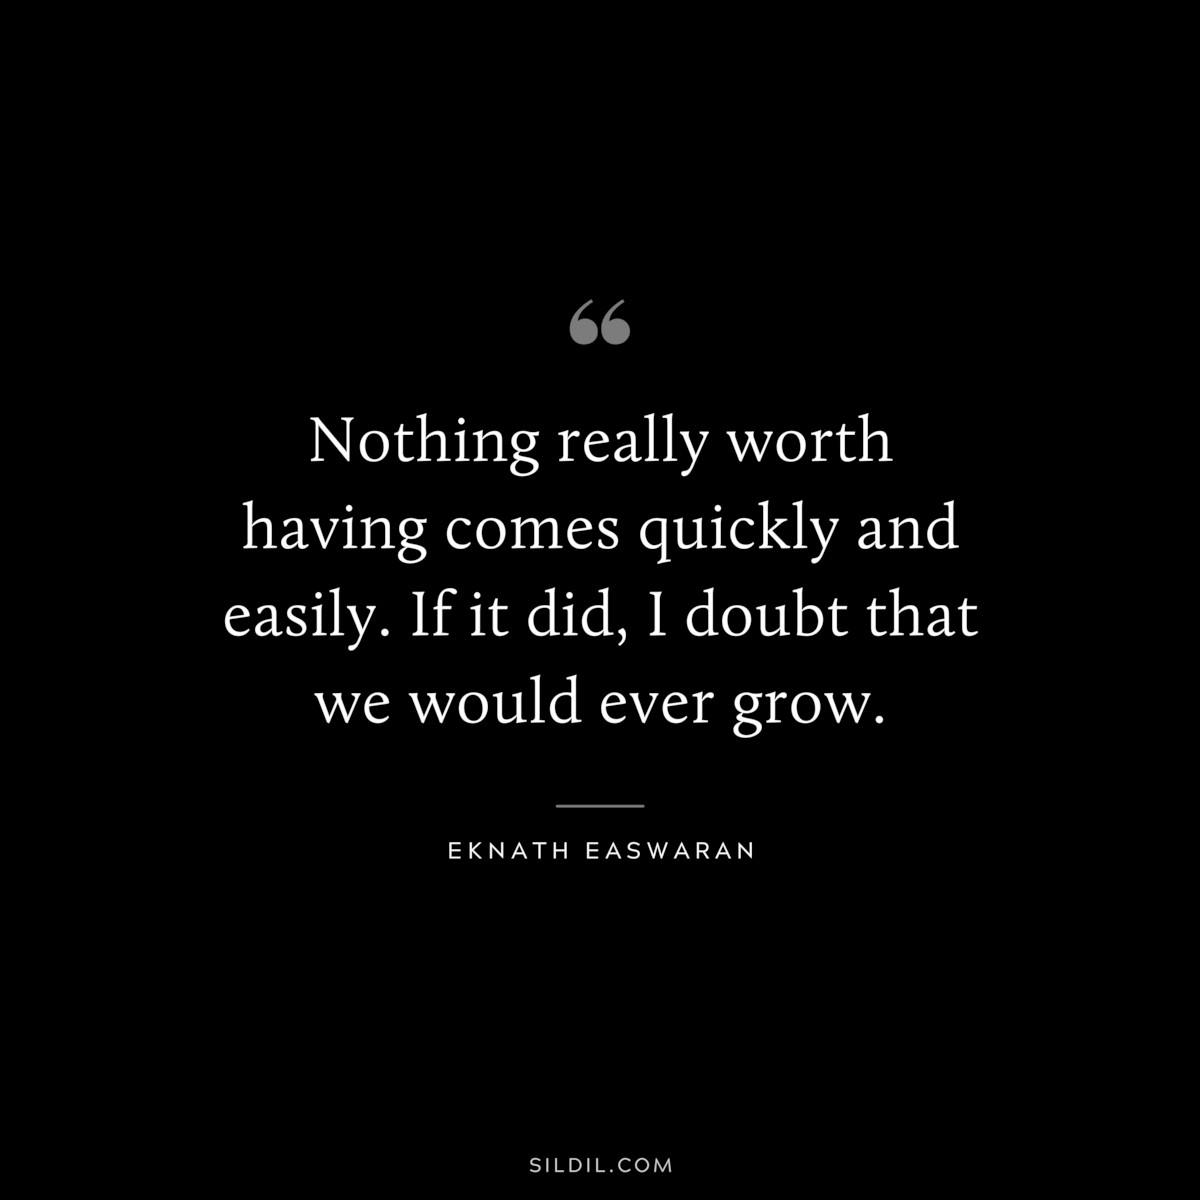 Nothing really worth having comes quickly and easily. If it did, I doubt that we would ever grow. ― Eknath Easwaran